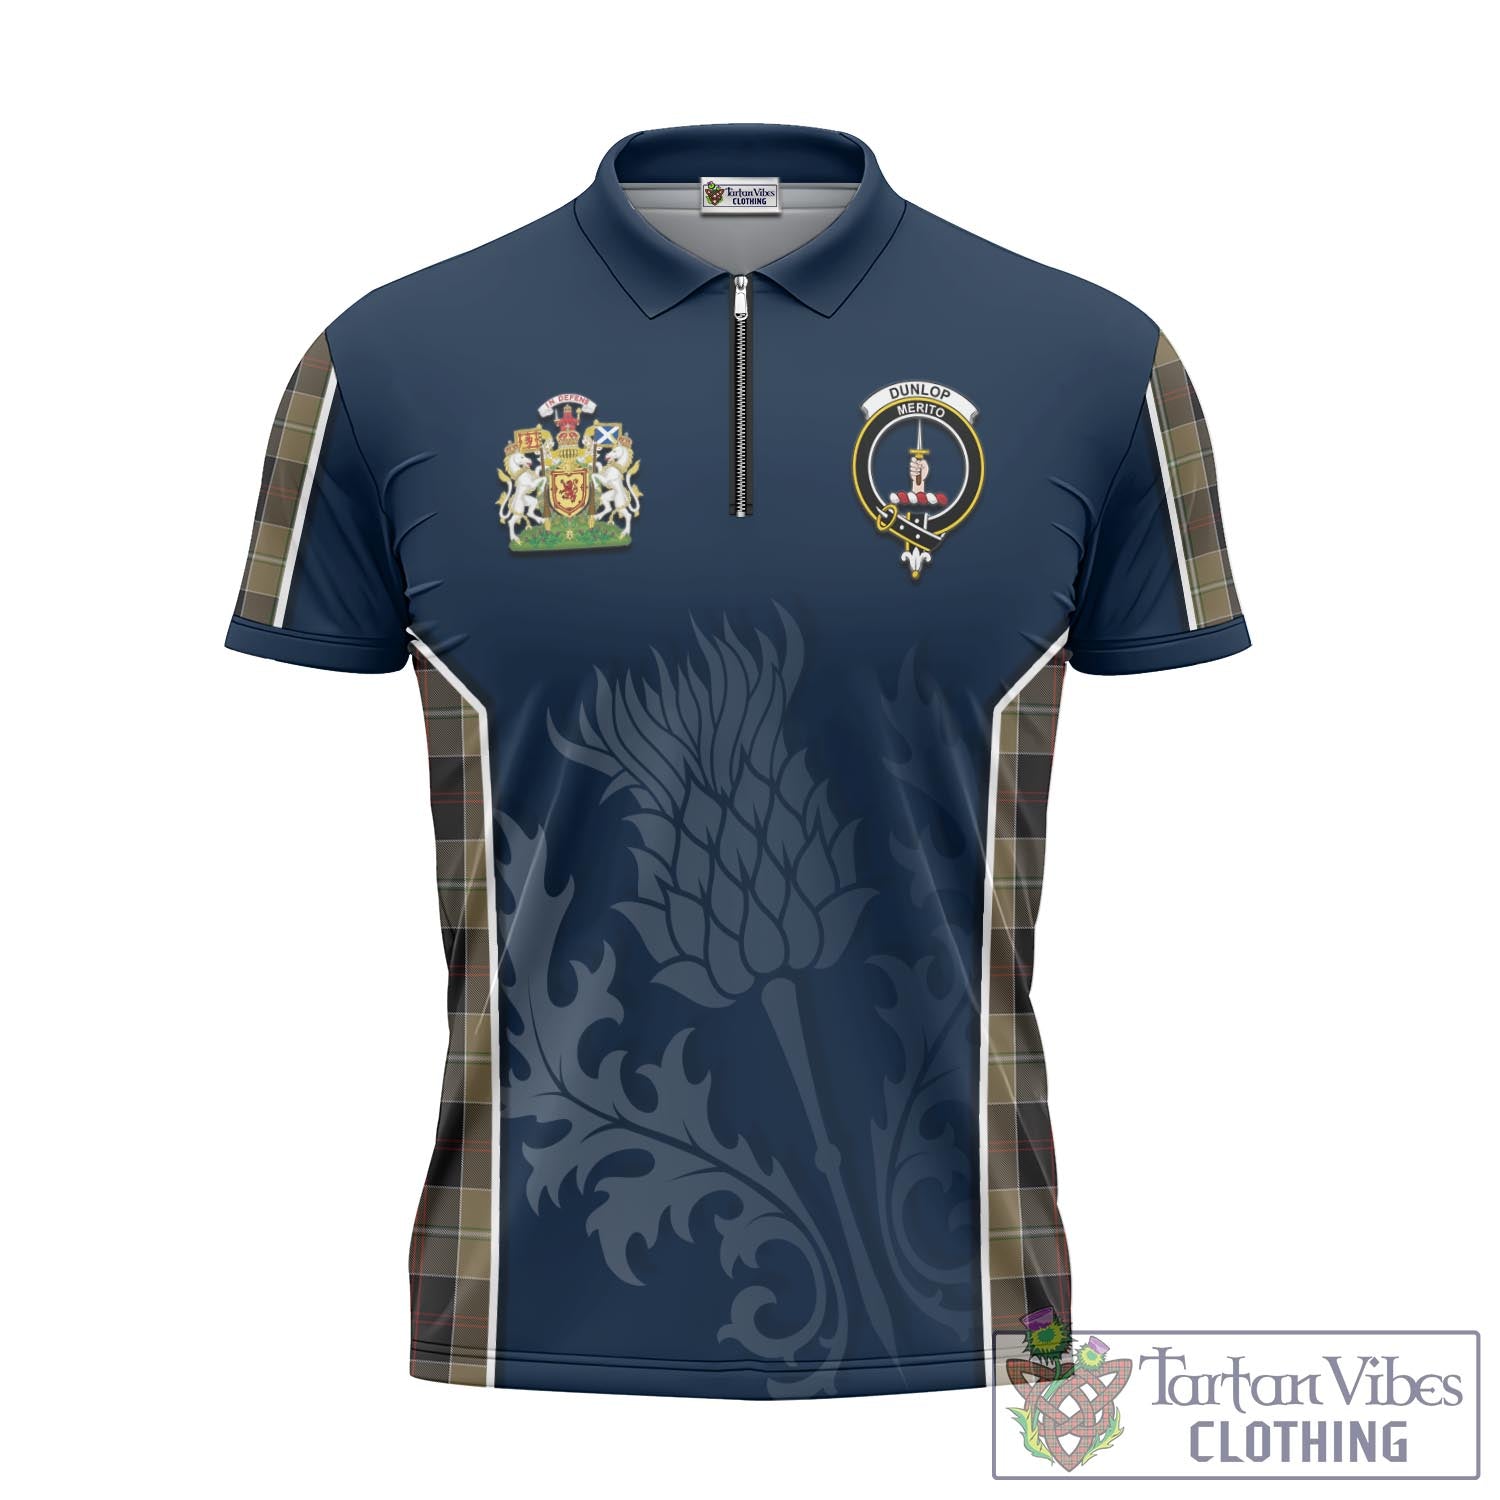 Tartan Vibes Clothing Dunlop Hunting Tartan Zipper Polo Shirt with Family Crest and Scottish Thistle Vibes Sport Style